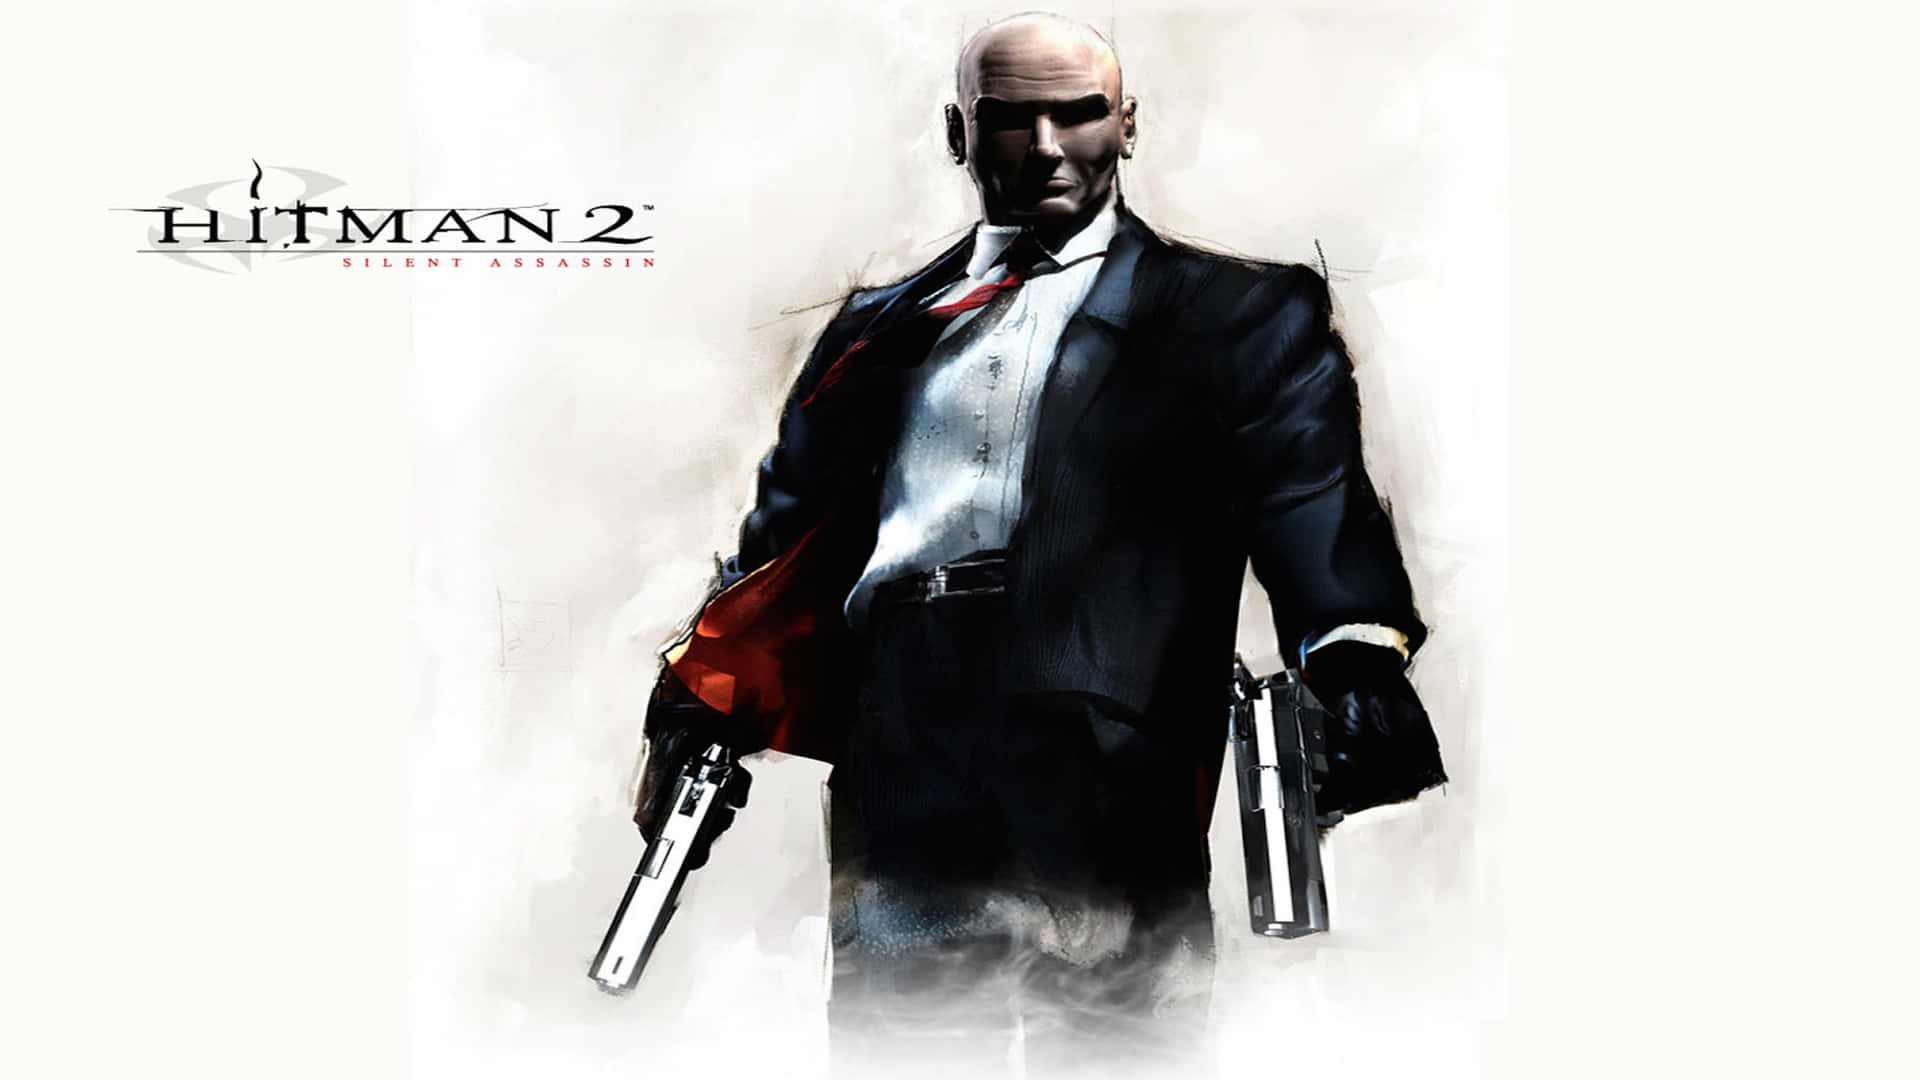 Play your way as Agent 47 in Hitman 2